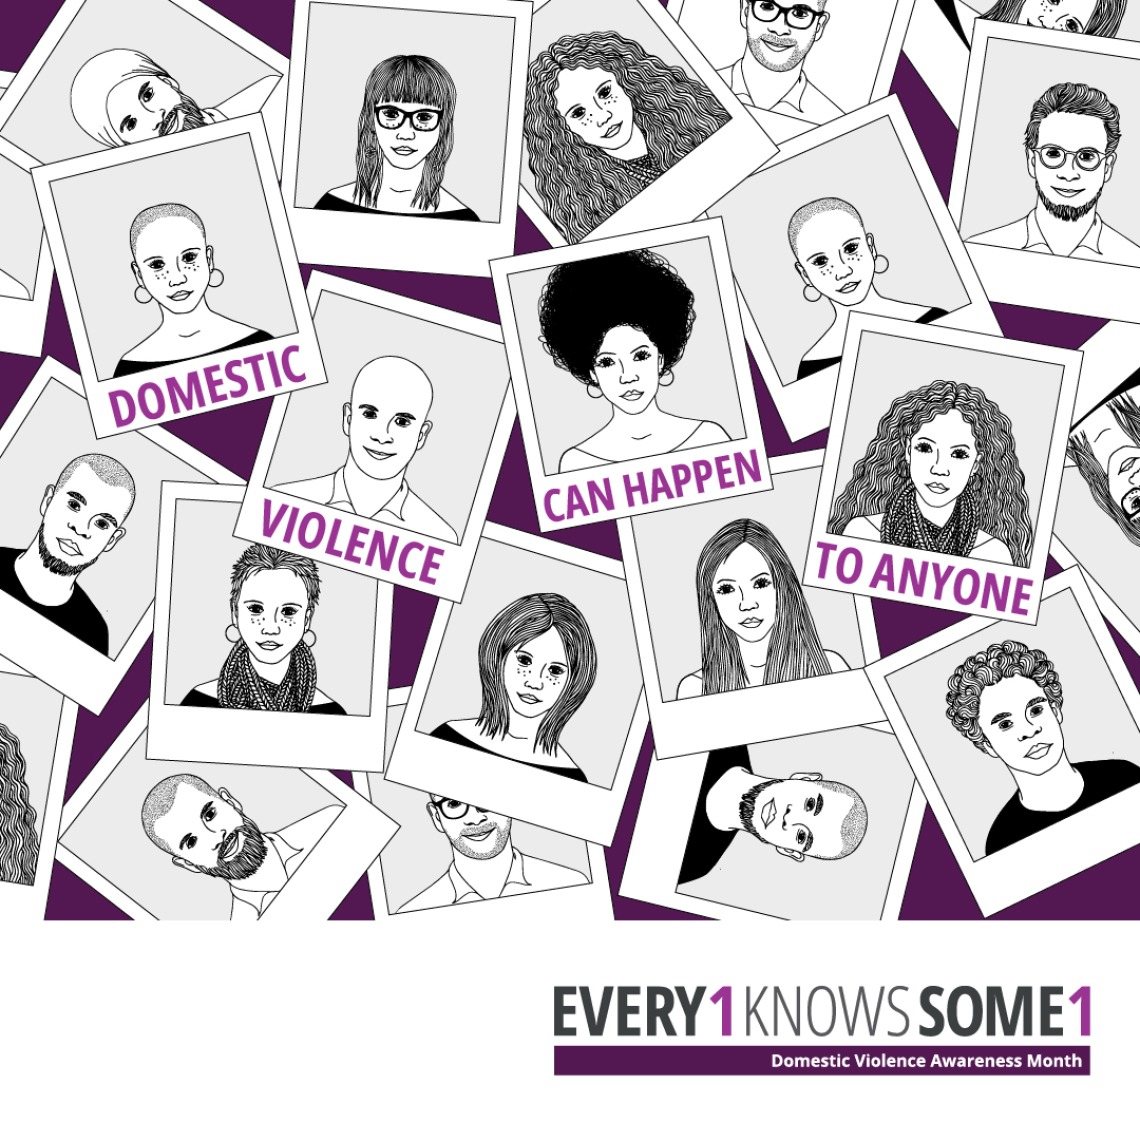 Drawing of many different people in Polaroid-style images, with purple text on some reading: "Domestic violence can happen to anyone." Dark gray, pink, and dark purple Every1KnowsSome1 logo in the bottom right.